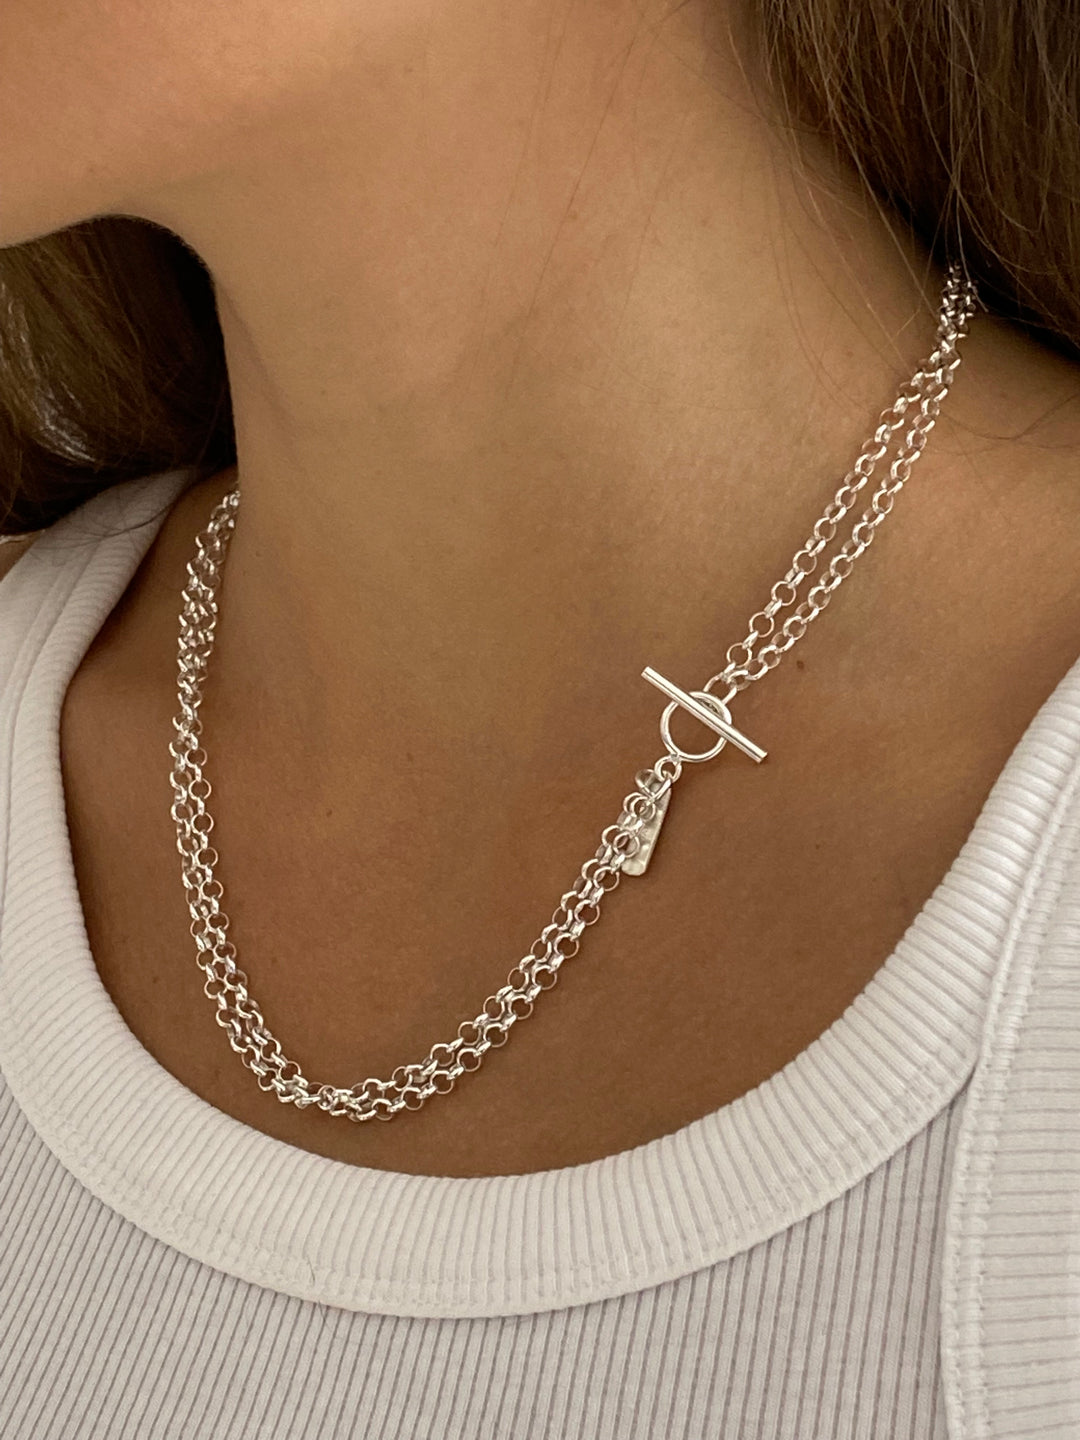 Women unisex silver double chain chic necklace - Made In Brookyn New York